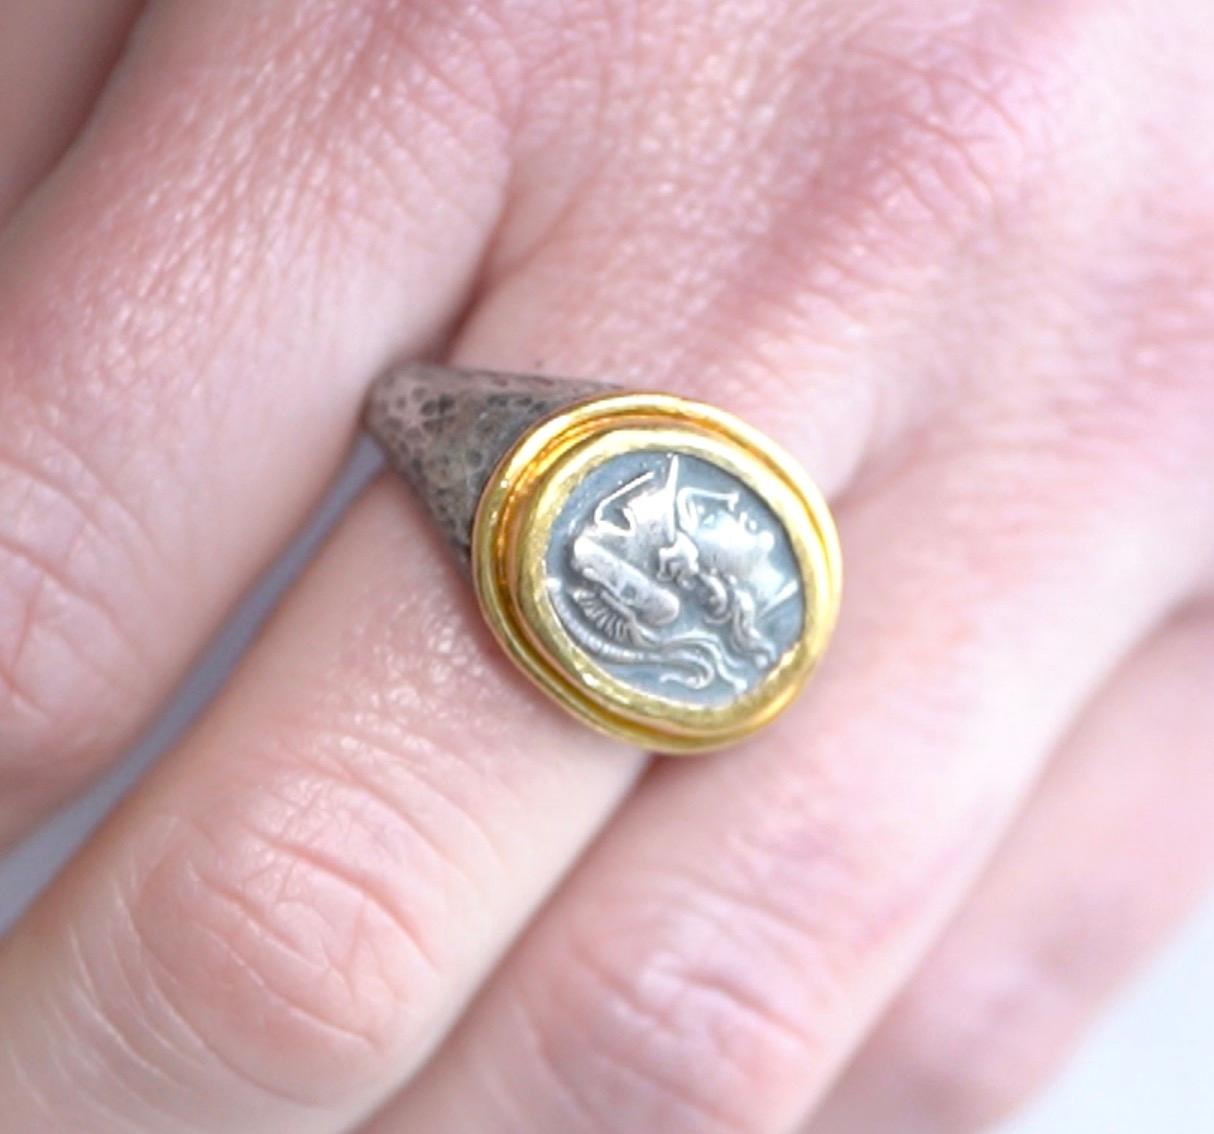 Athena, Goddess of Wisdom and War, 24kt Gold and Silver Ring by Prehistoric Works of Istanbul, Turkey. Size 7 US